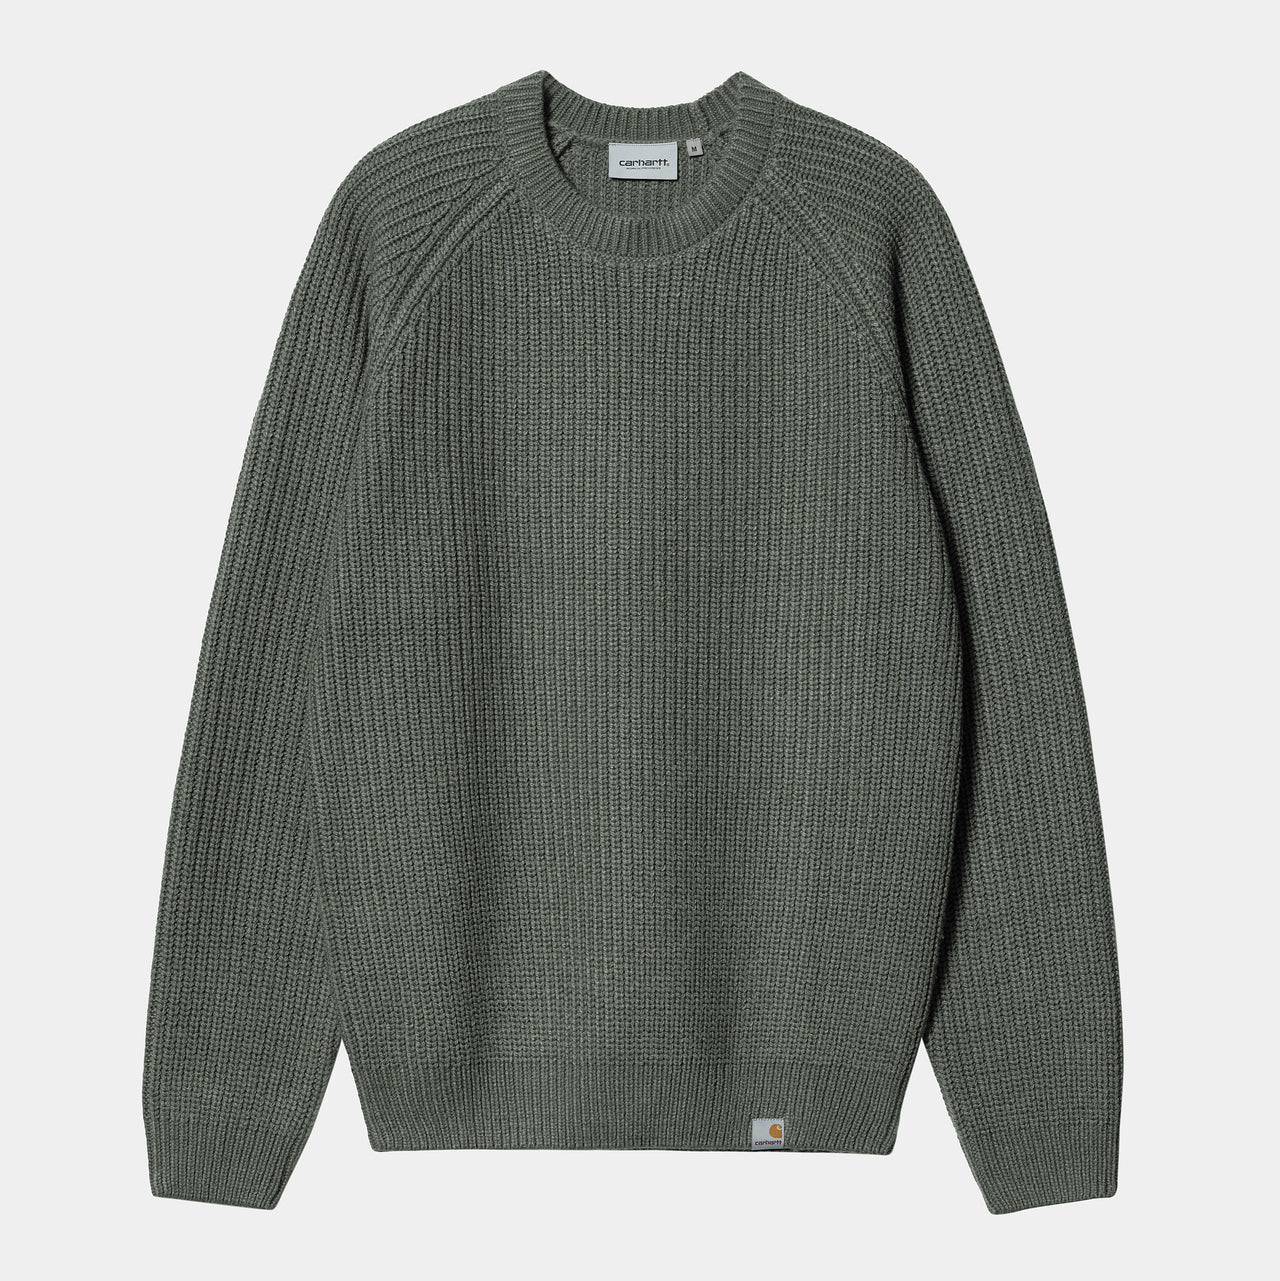 FORTH SWEATER BY CARHARTT WIP